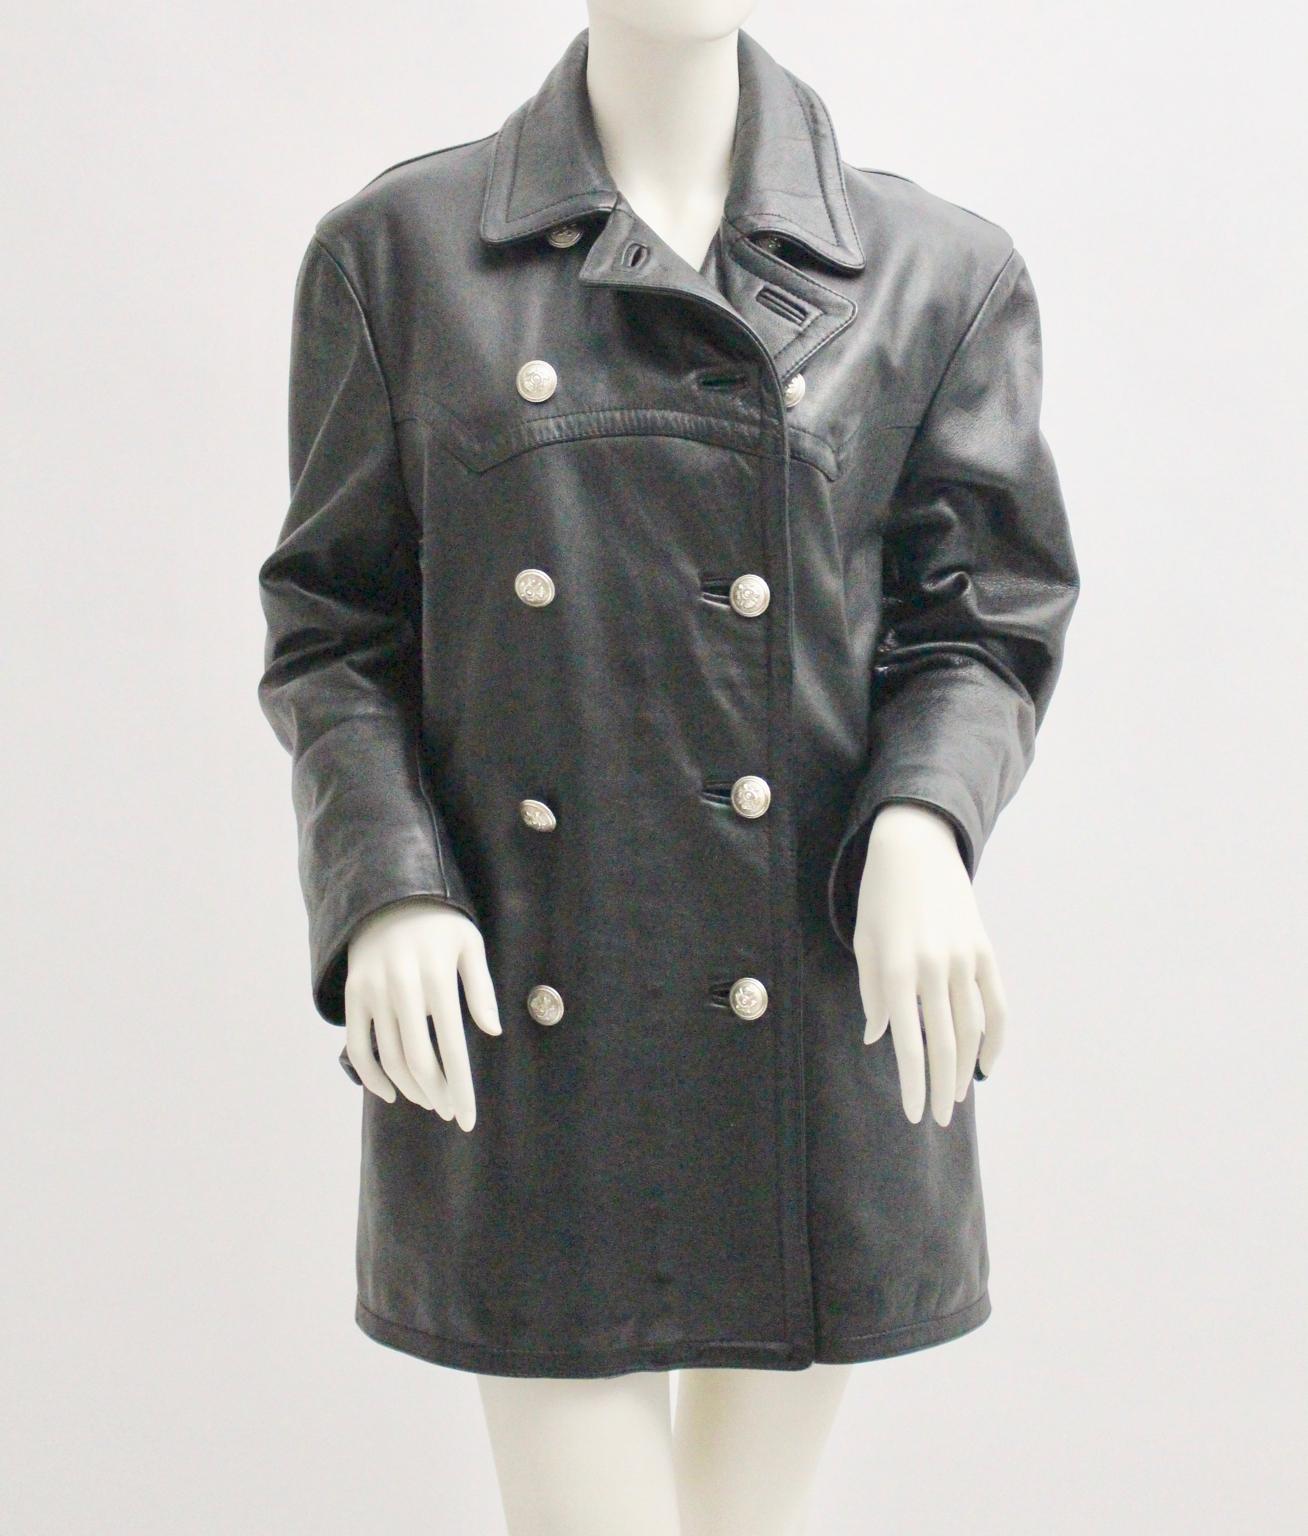 This vintage piece is a top quality double breasted leather jacket, which was designed by Jil Sander and made in Italy.

The black Jacket has a double breasted button closure and two side pockets, 
also close with two silver buttons. 
The leather